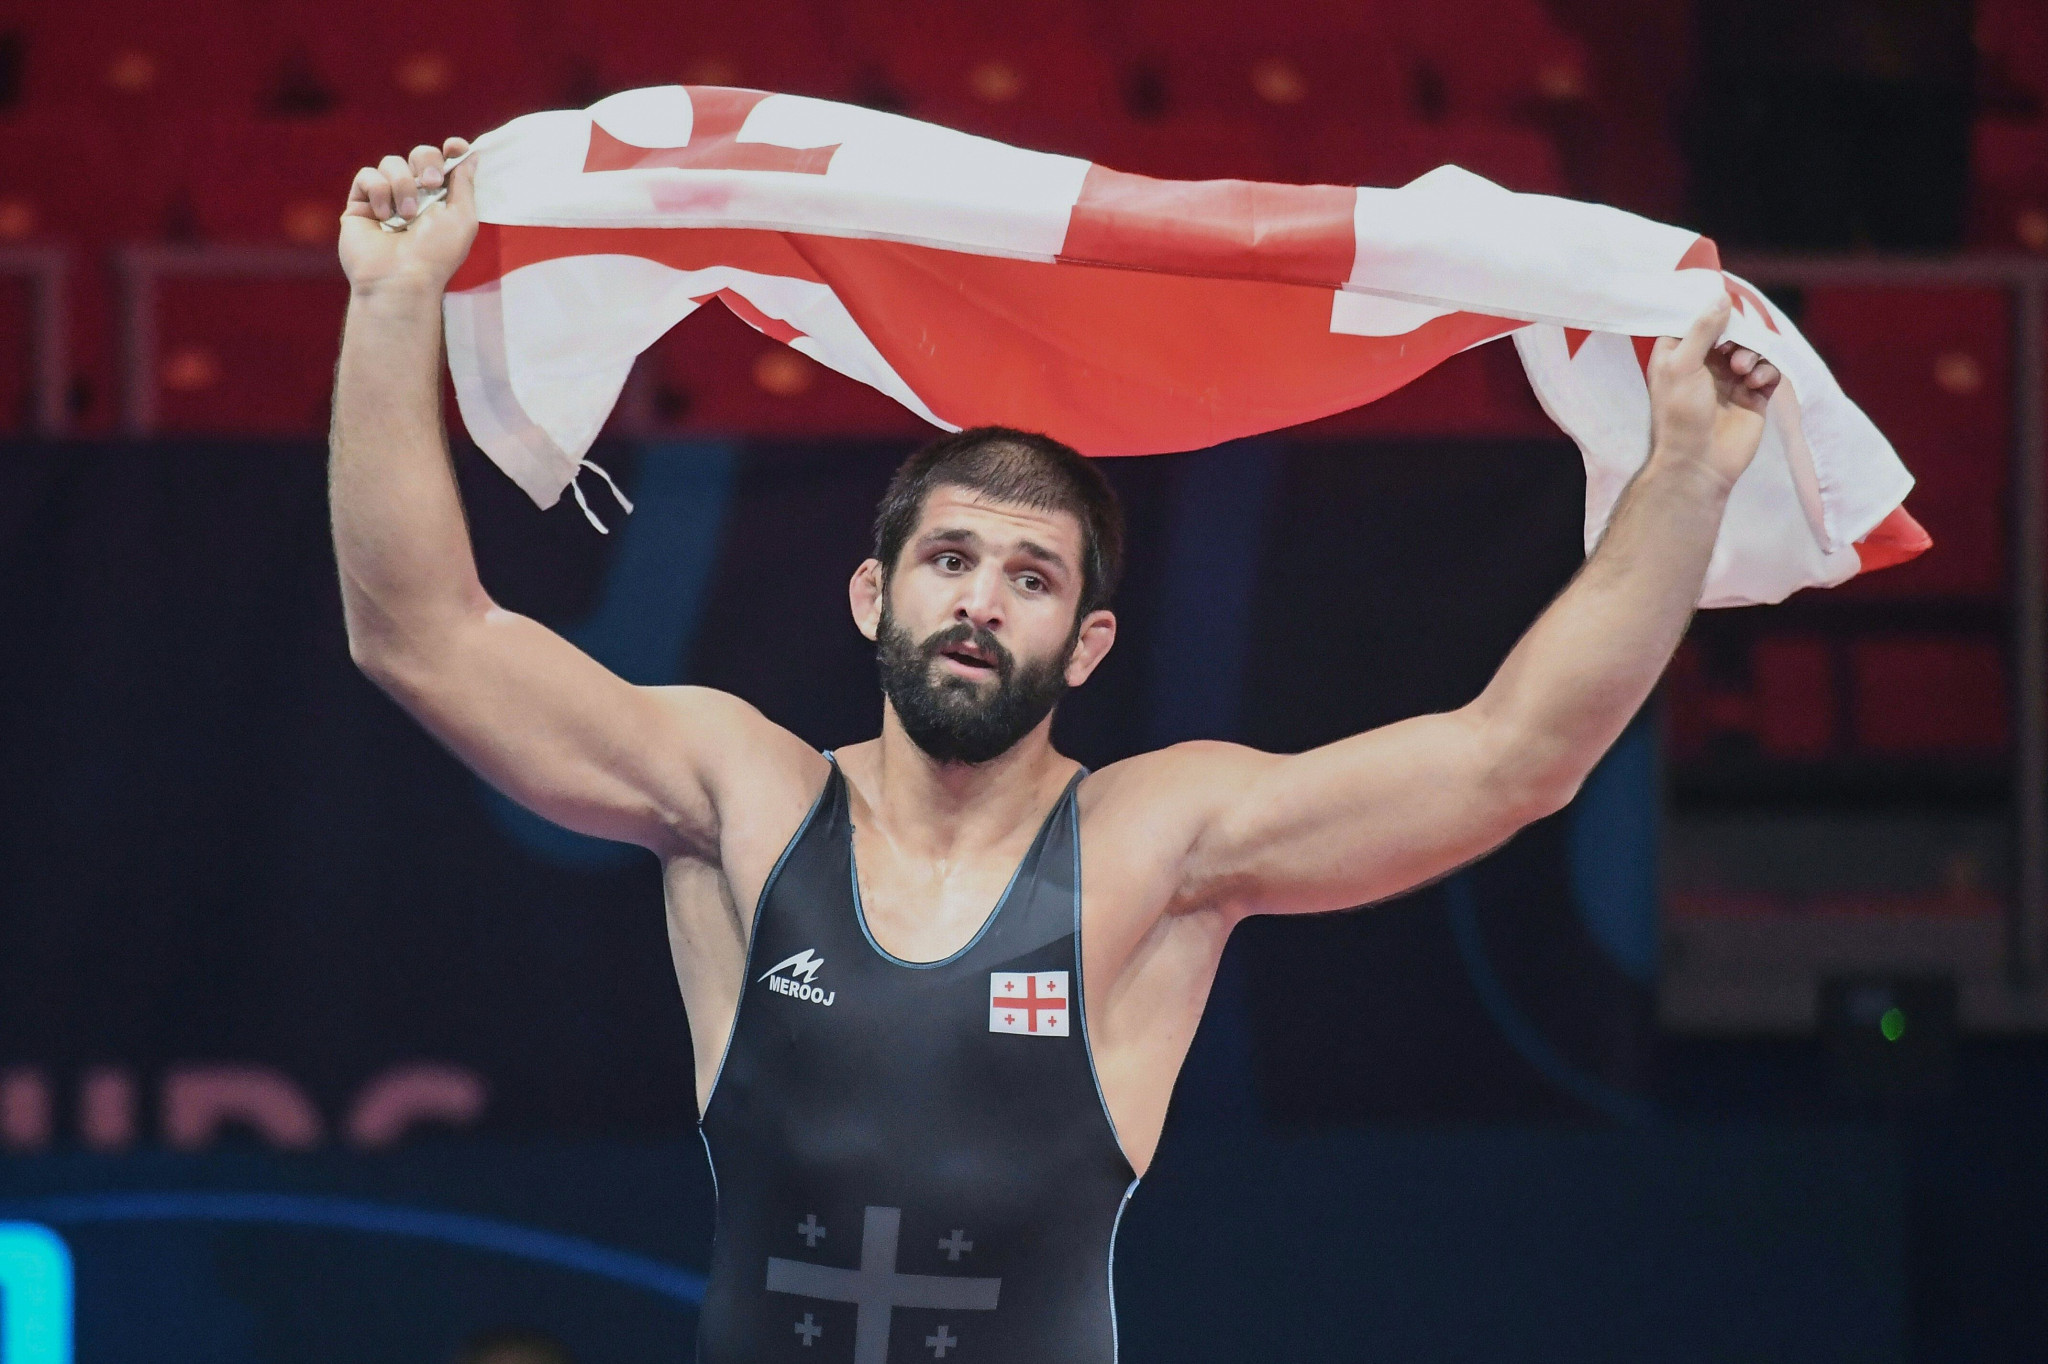 Geno Petriashvili is among 16 wrestlers that will be looking to defend their European title ©Getty Images